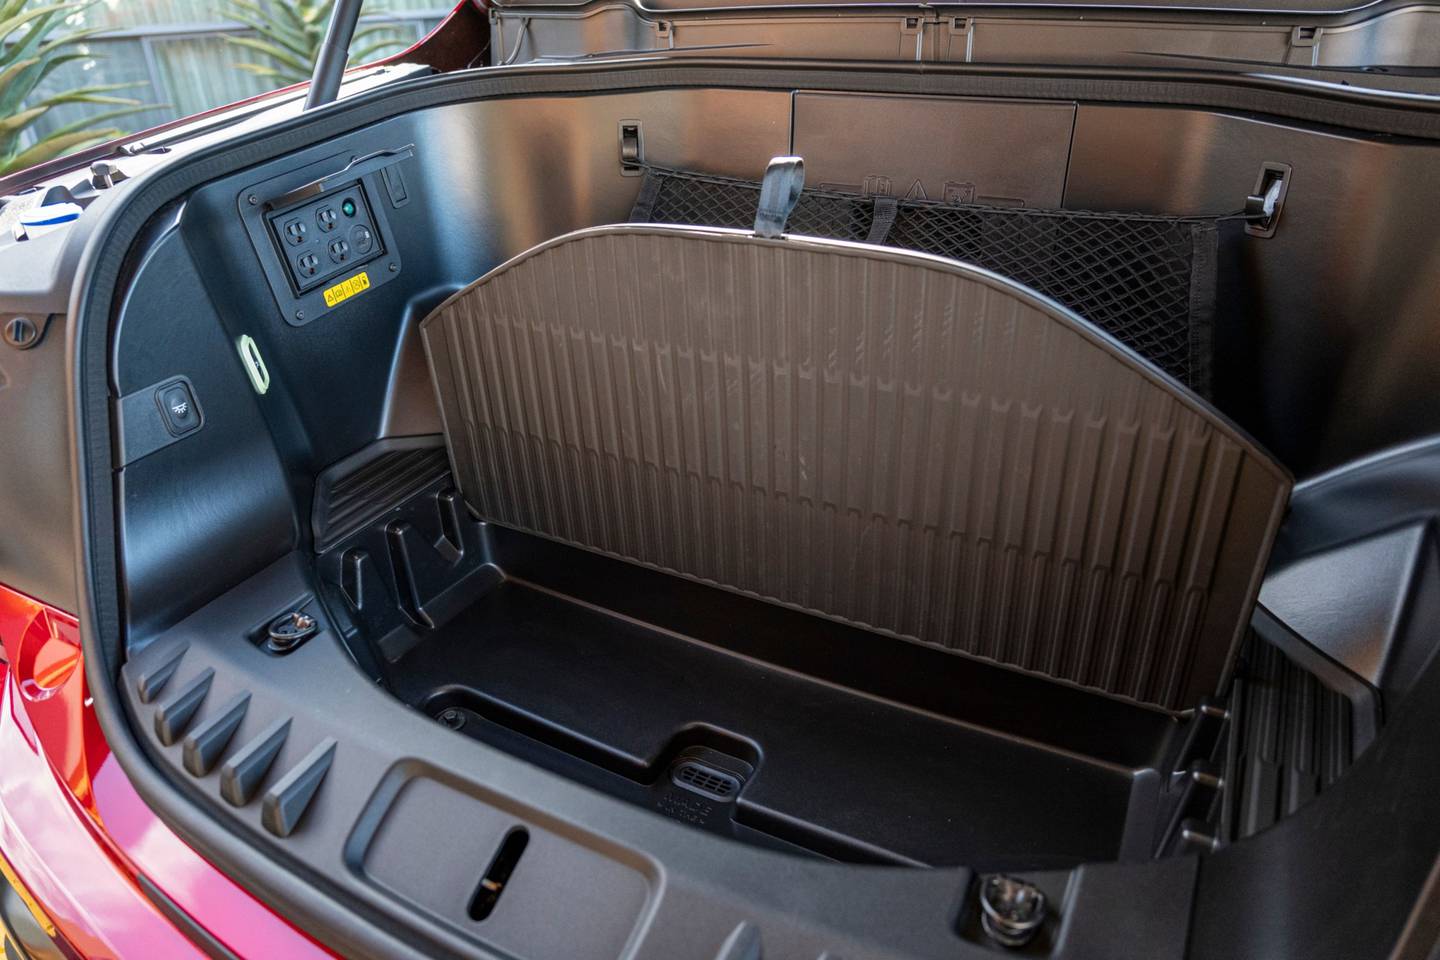 The trunk contains four 120-volt power outlets.  Photographer: David Paul Morris / Bloombergdfd